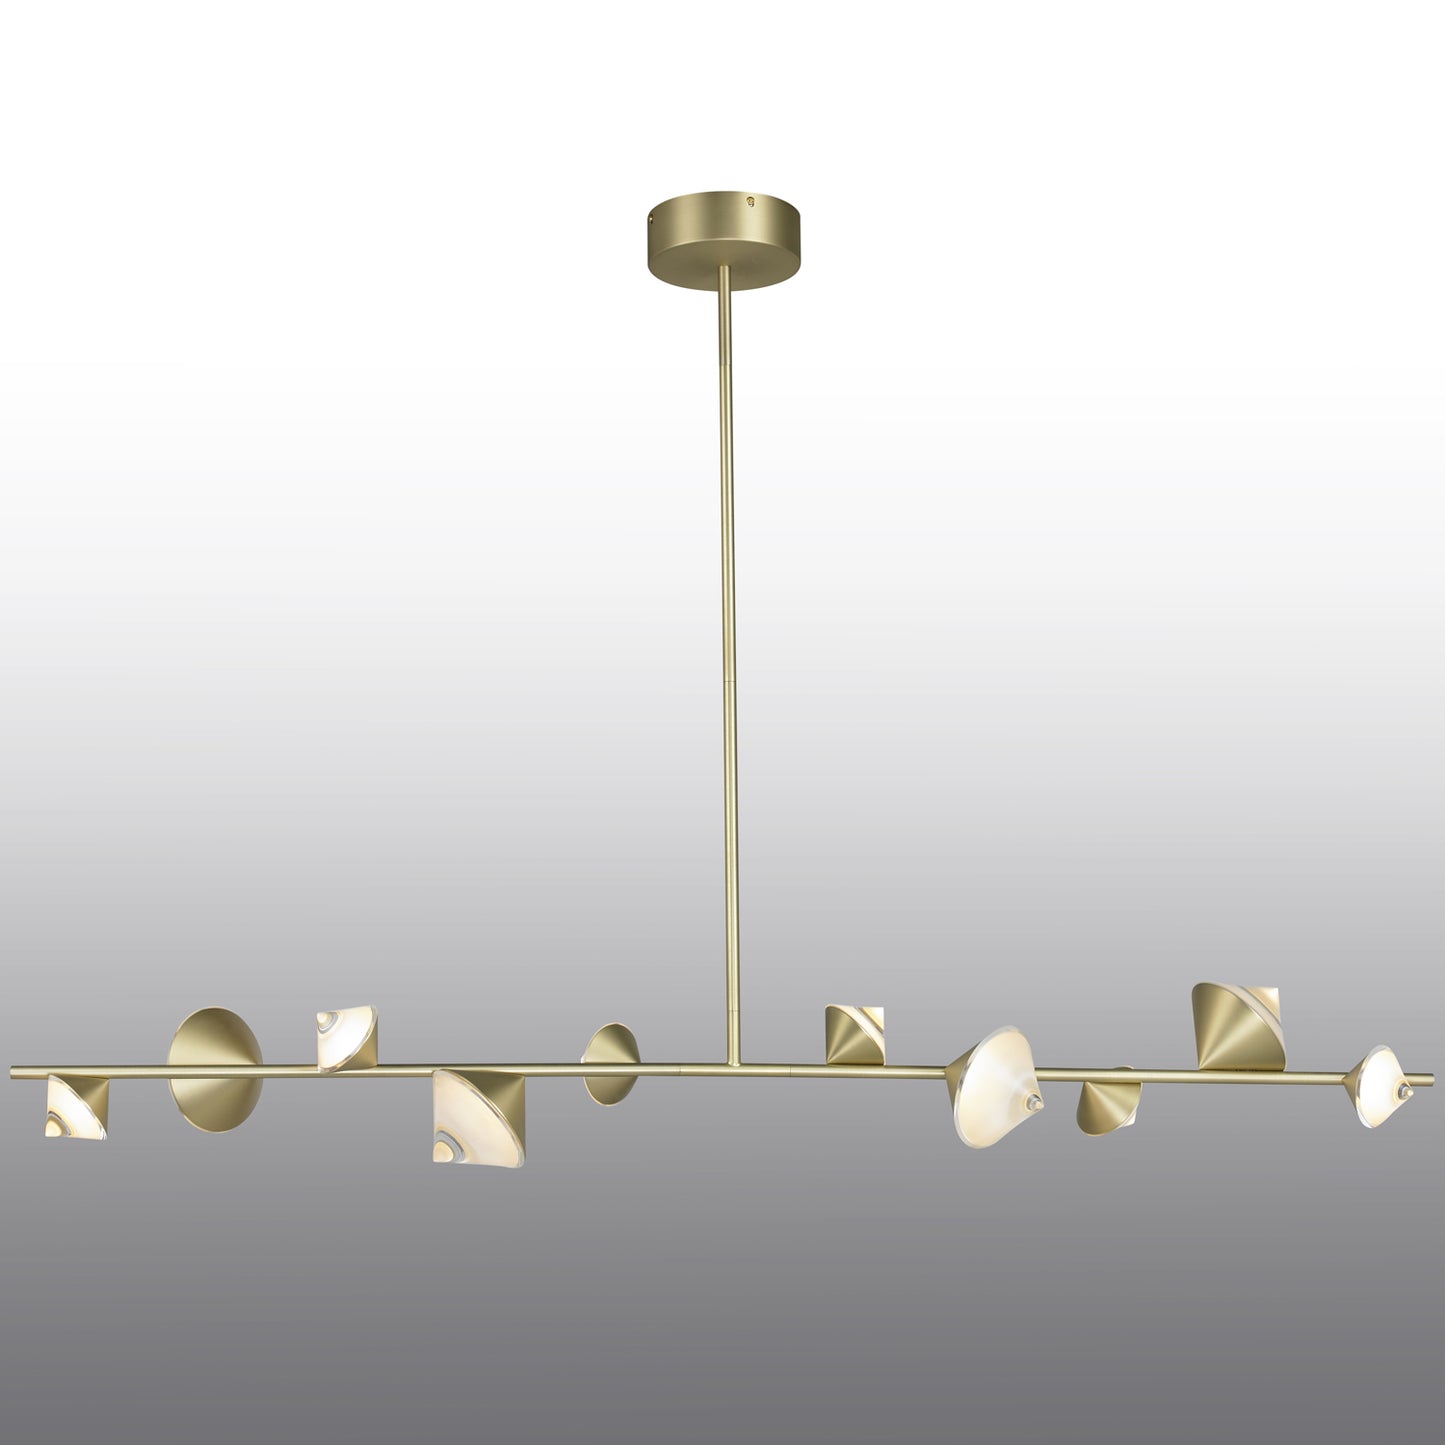 Load image into Gallery viewer, Table Pendant Light by Gloss (9113)
